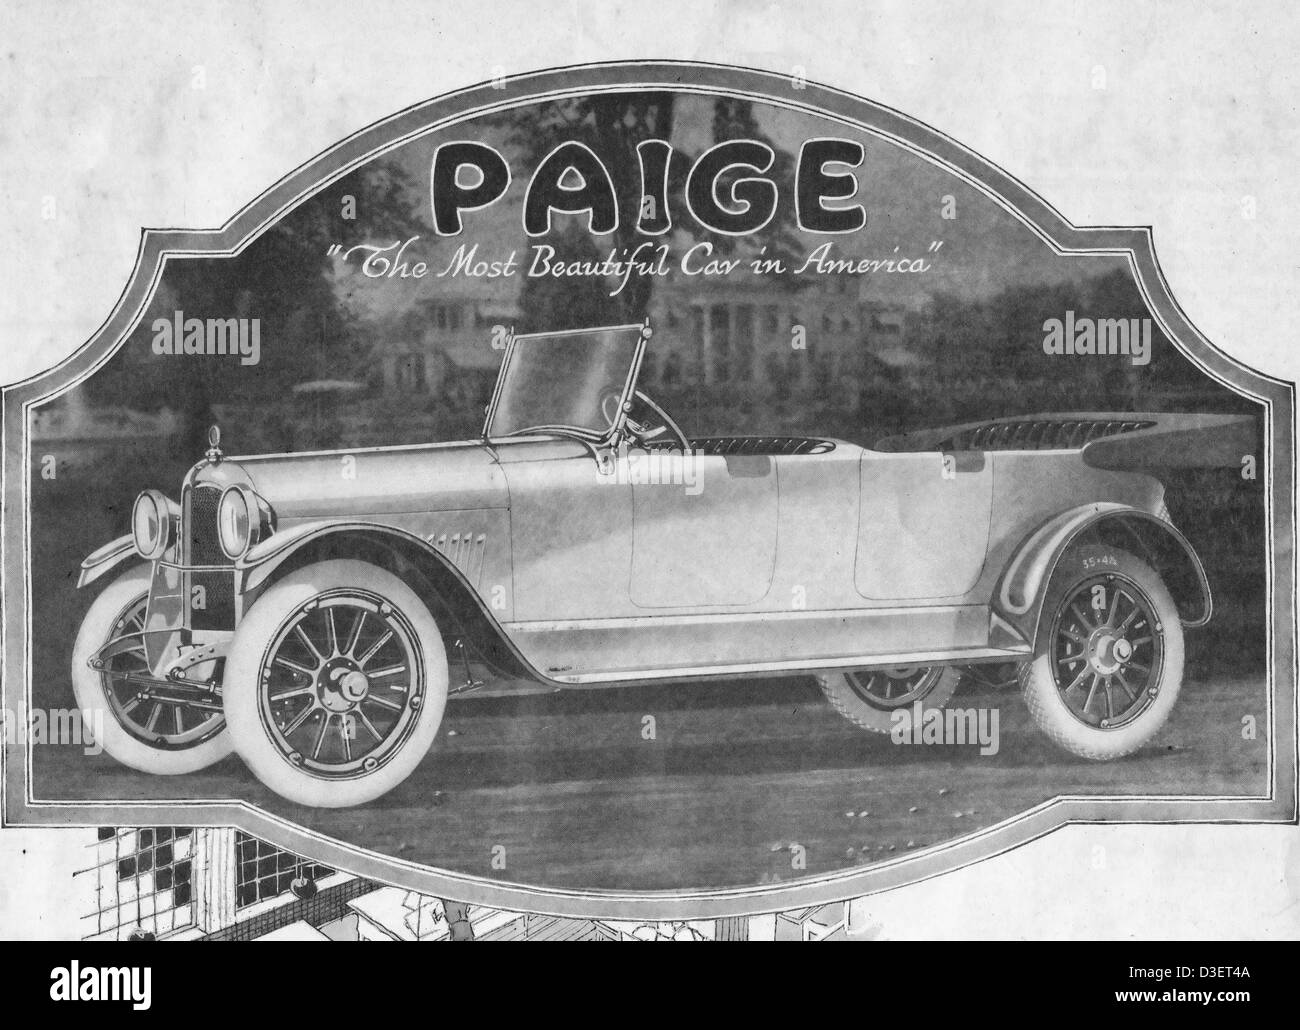 Paige Motor Car Company Advertisement - The Most Beautiful Car in America 1917 Stock Photo